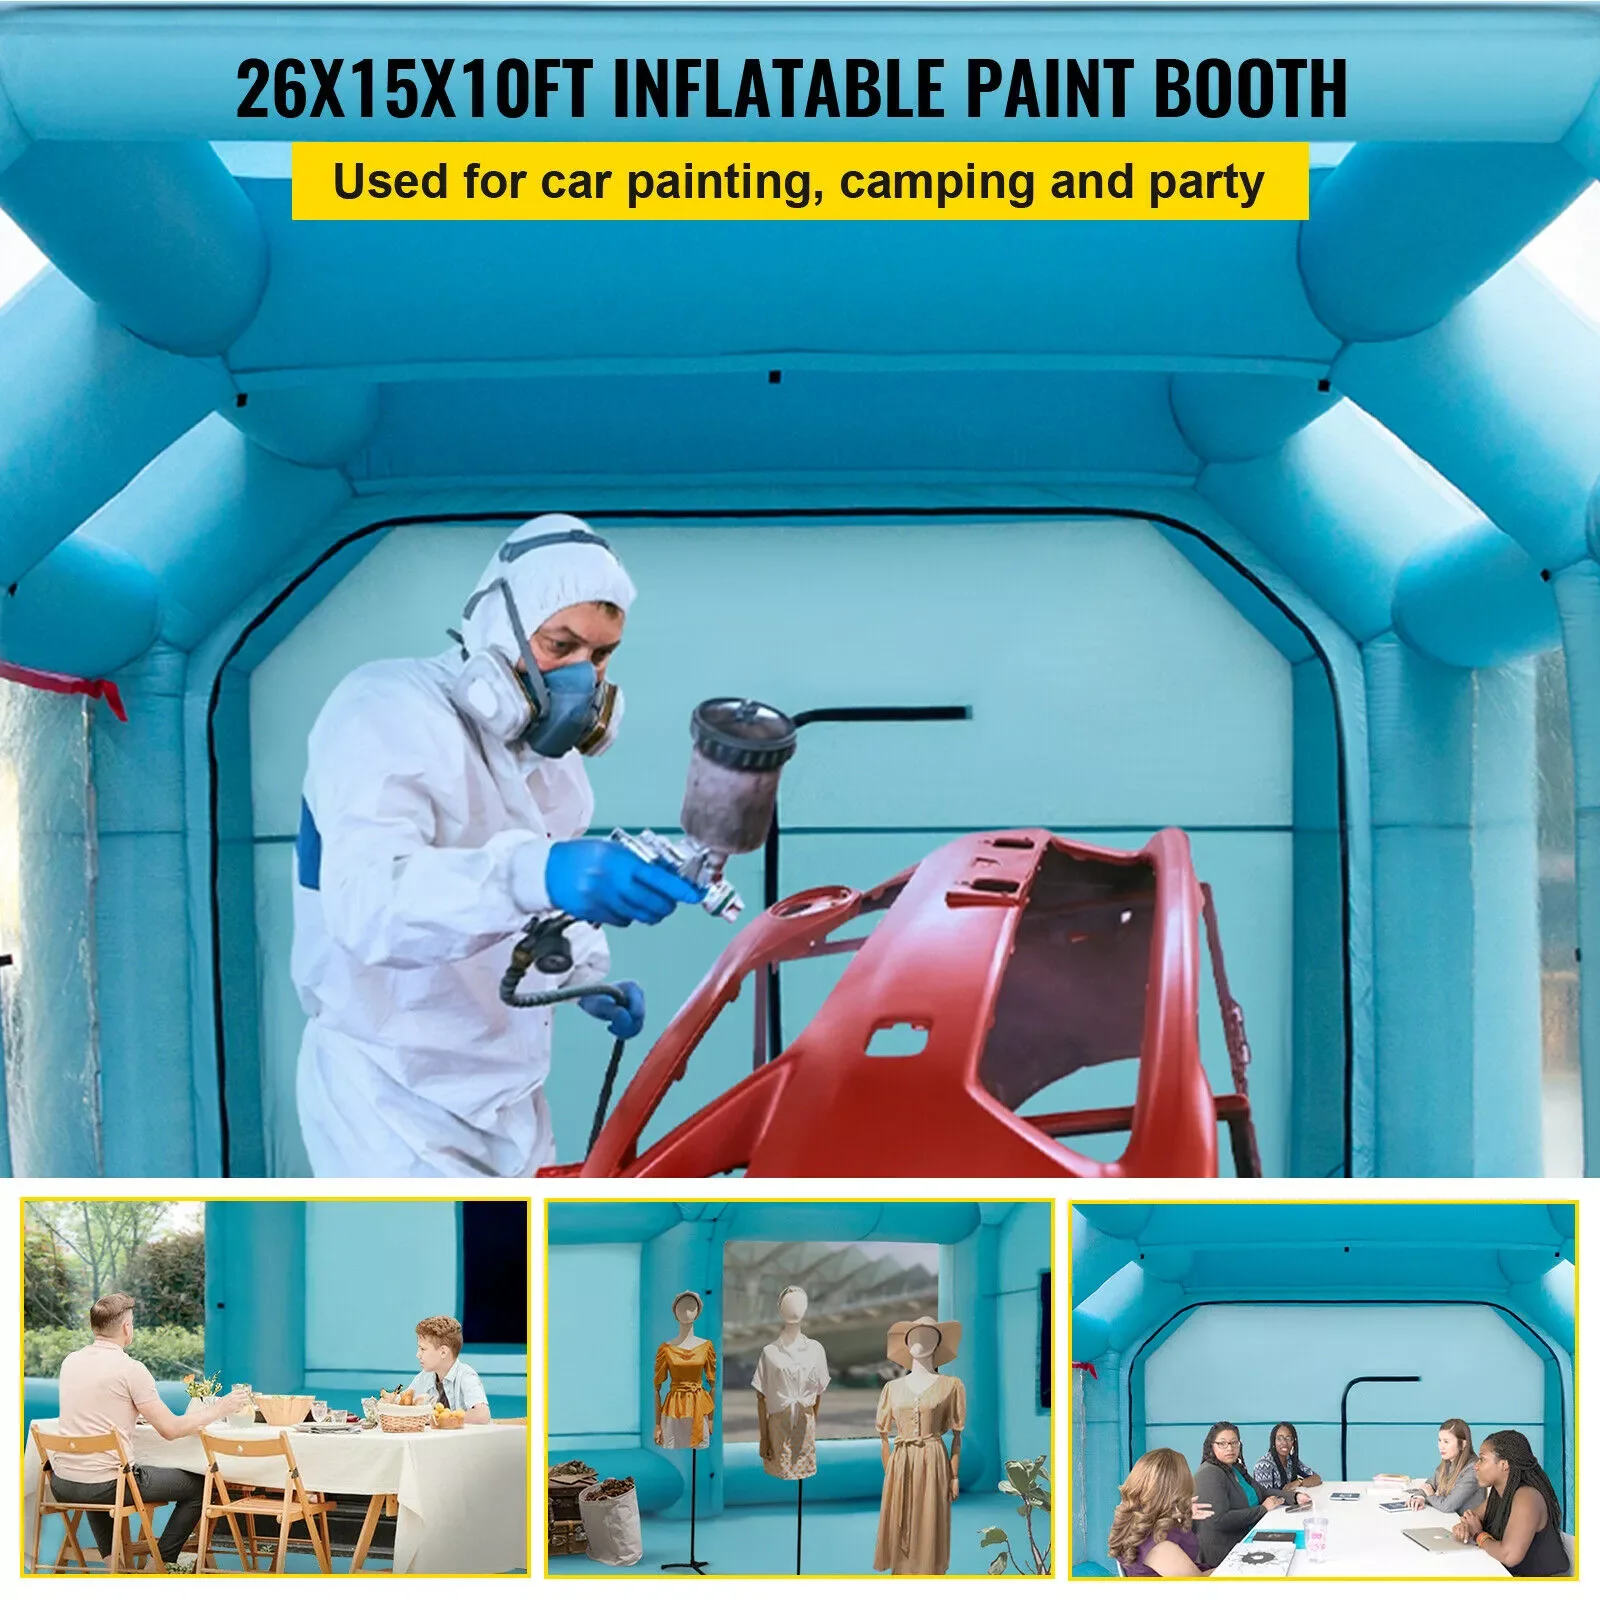 

Inflatable Paint Booth Carport Car Paint Booth Tent W/ Blowers Car Workstation Mobile Shelter Room Airbrush Outdoor Garage